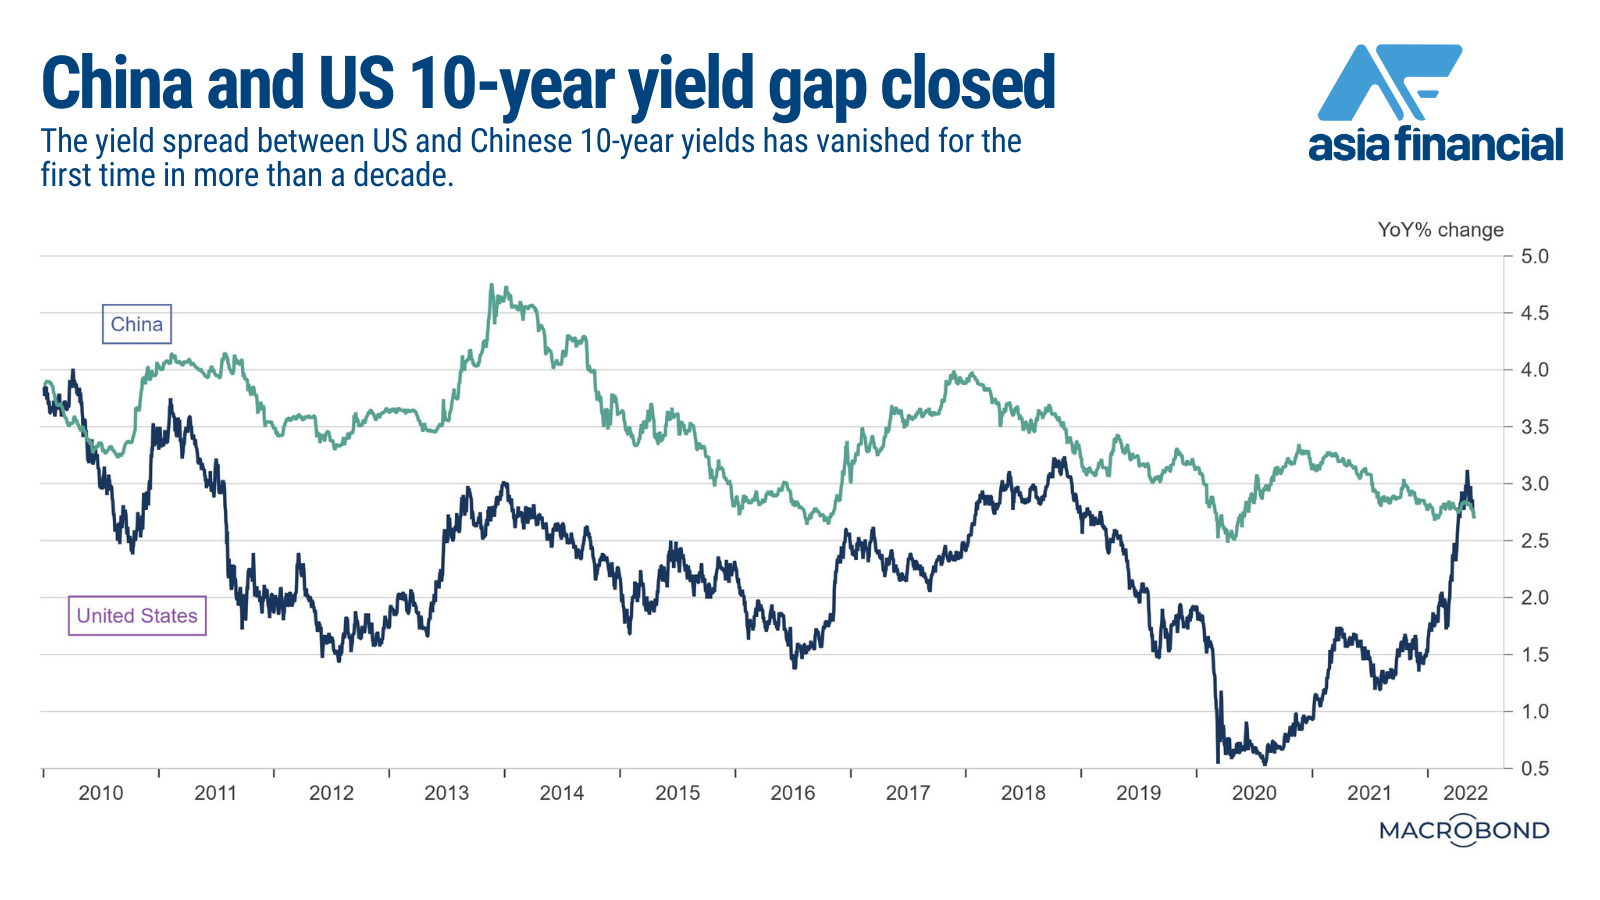 The yield spread between US and Chinese 10-year yields has vanished for the first time in more than a decade.